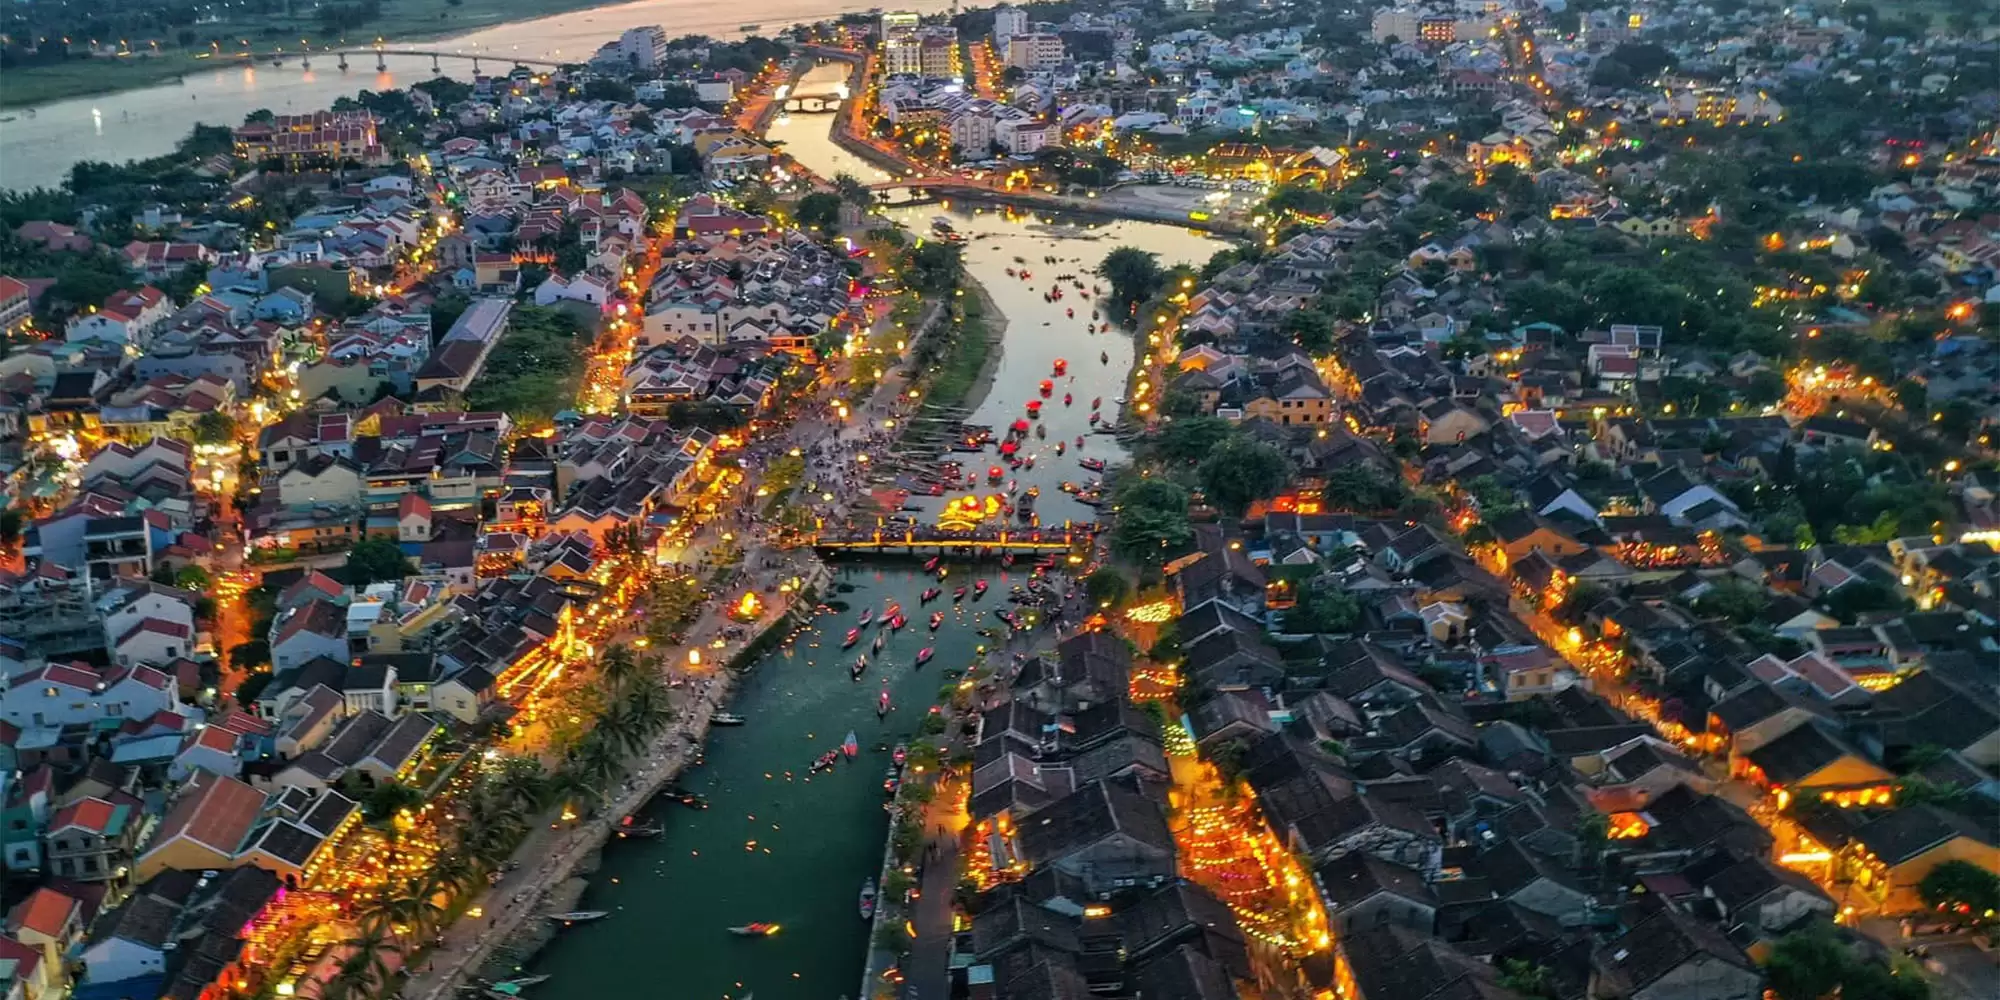 Hoi An is honored as the Best Corporate Resort Destination in Asia 2023